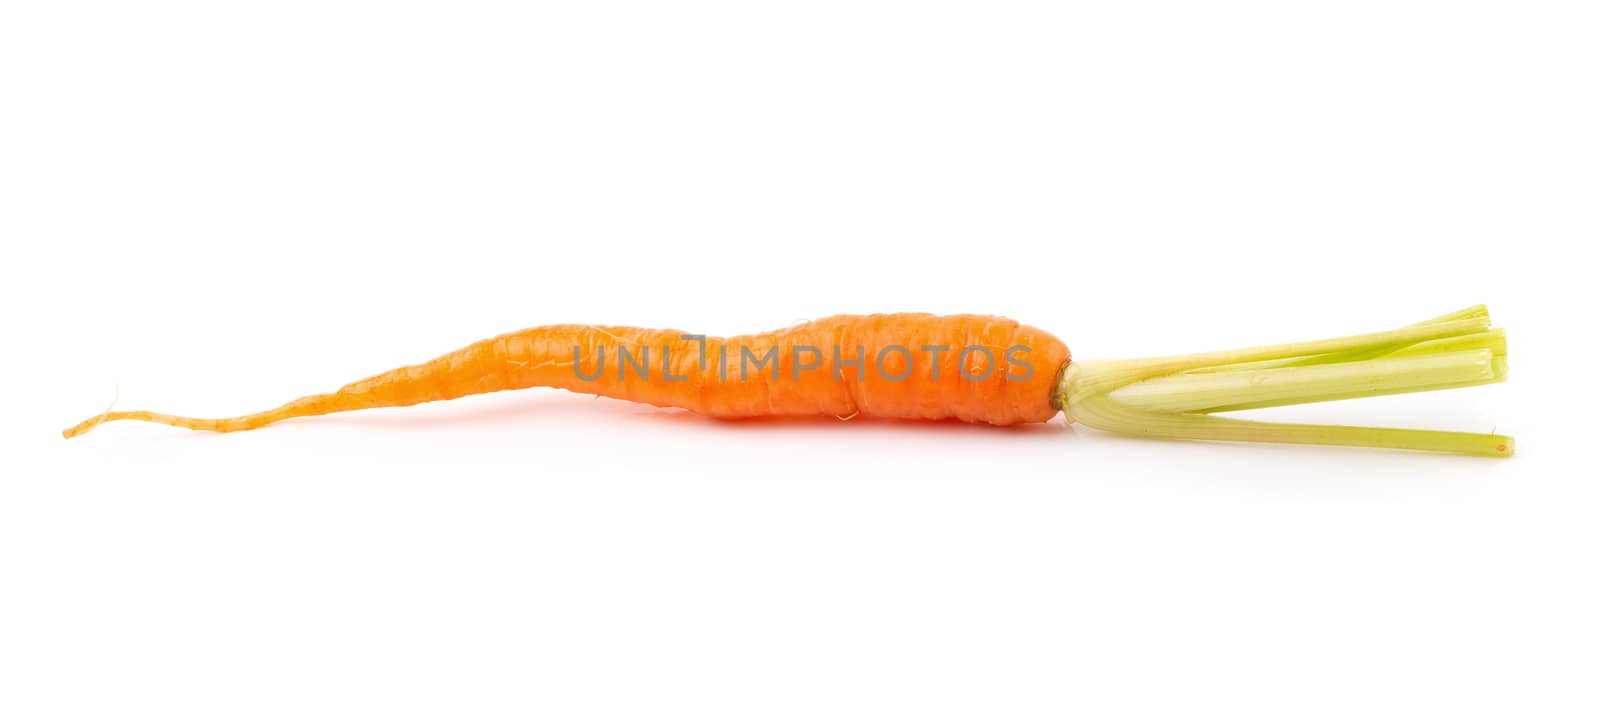 Fresh baby carrots isolated on a white background.